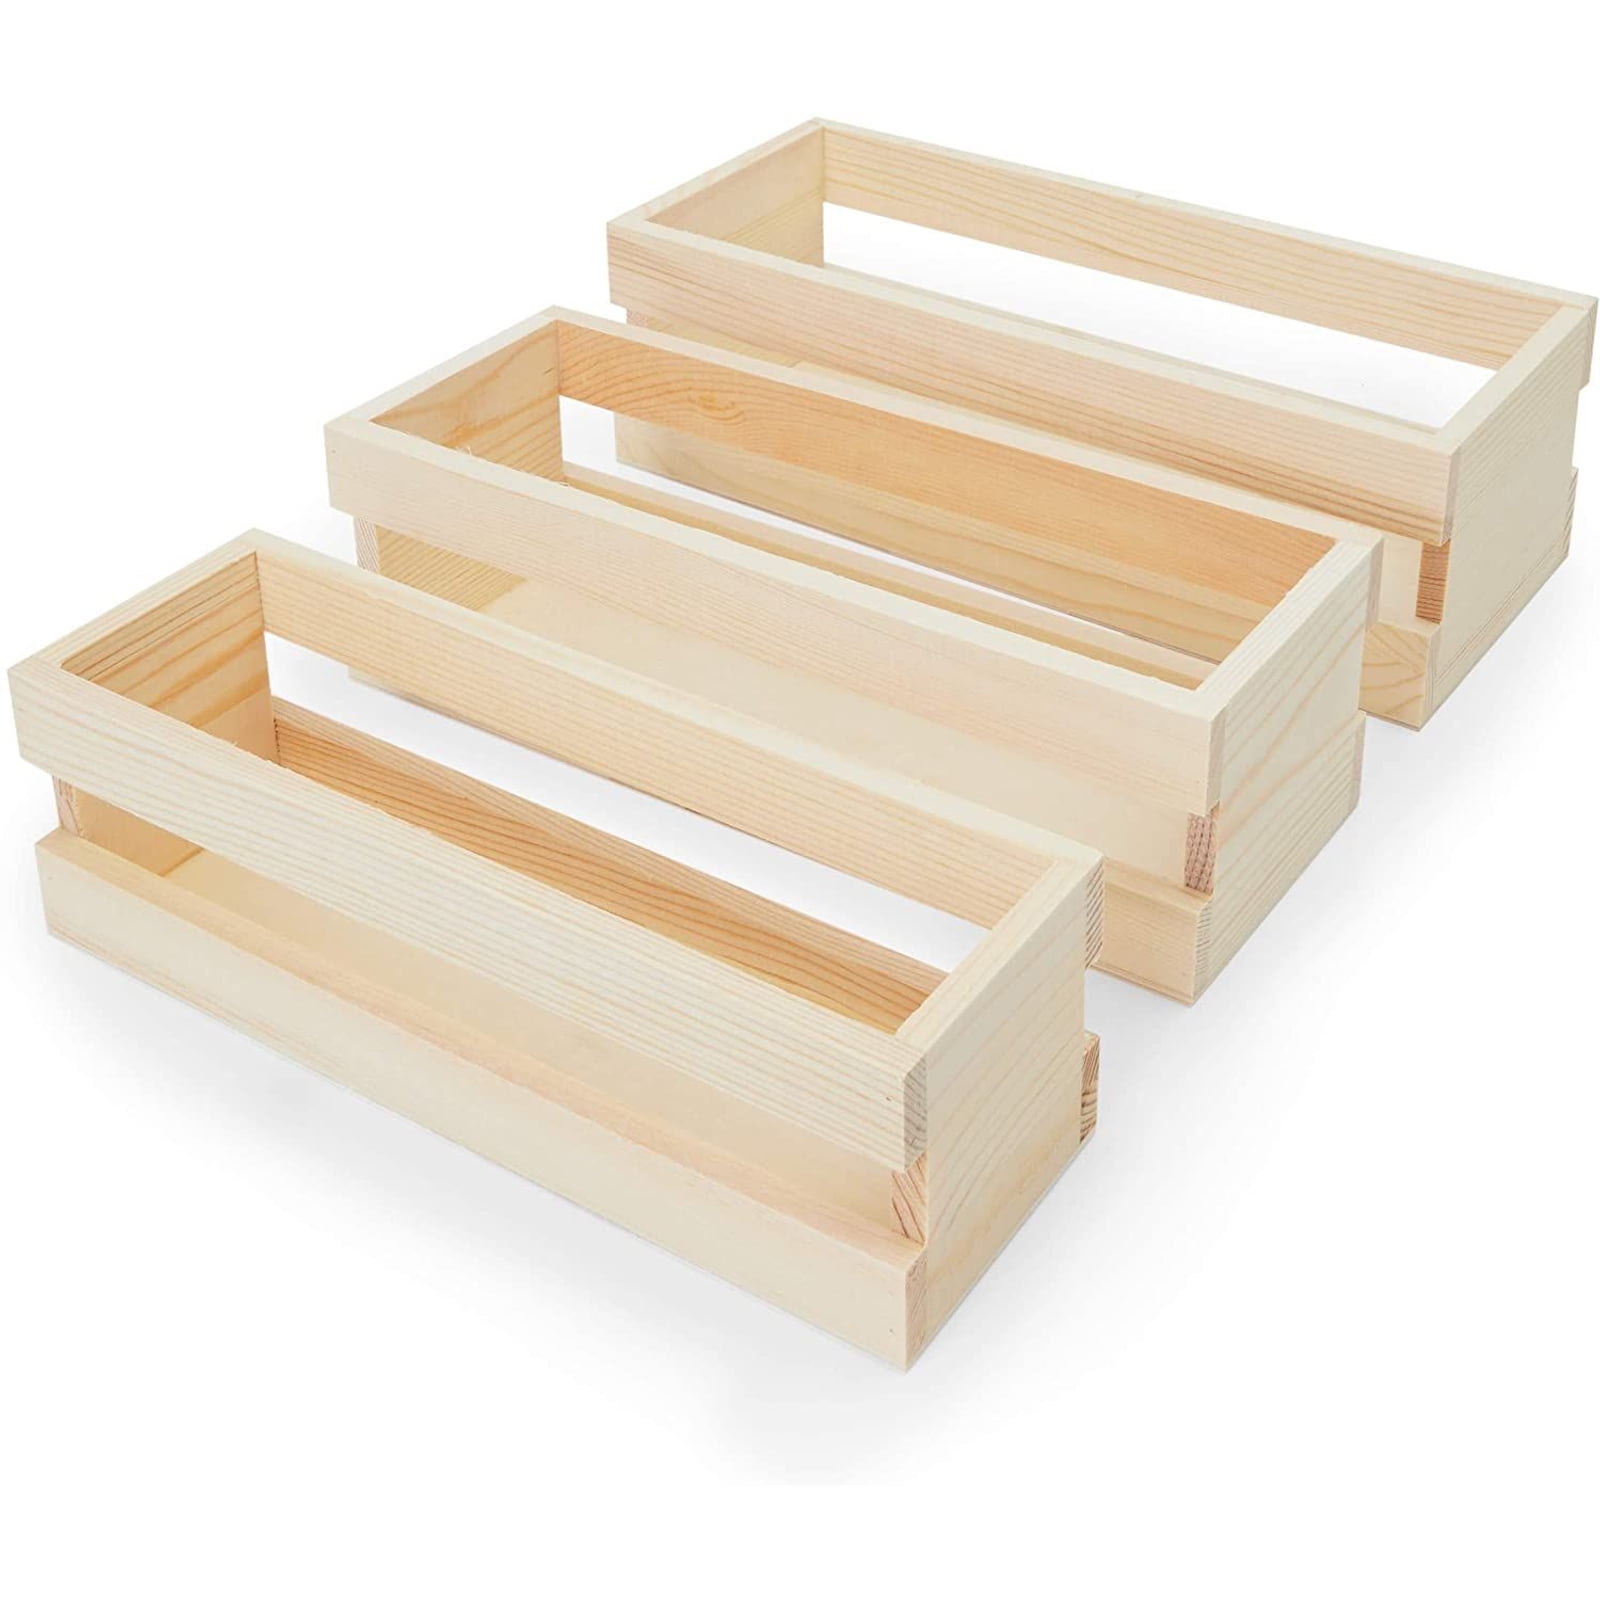 Colorations® Decorate Your Own Wooden Trays - Set of 6